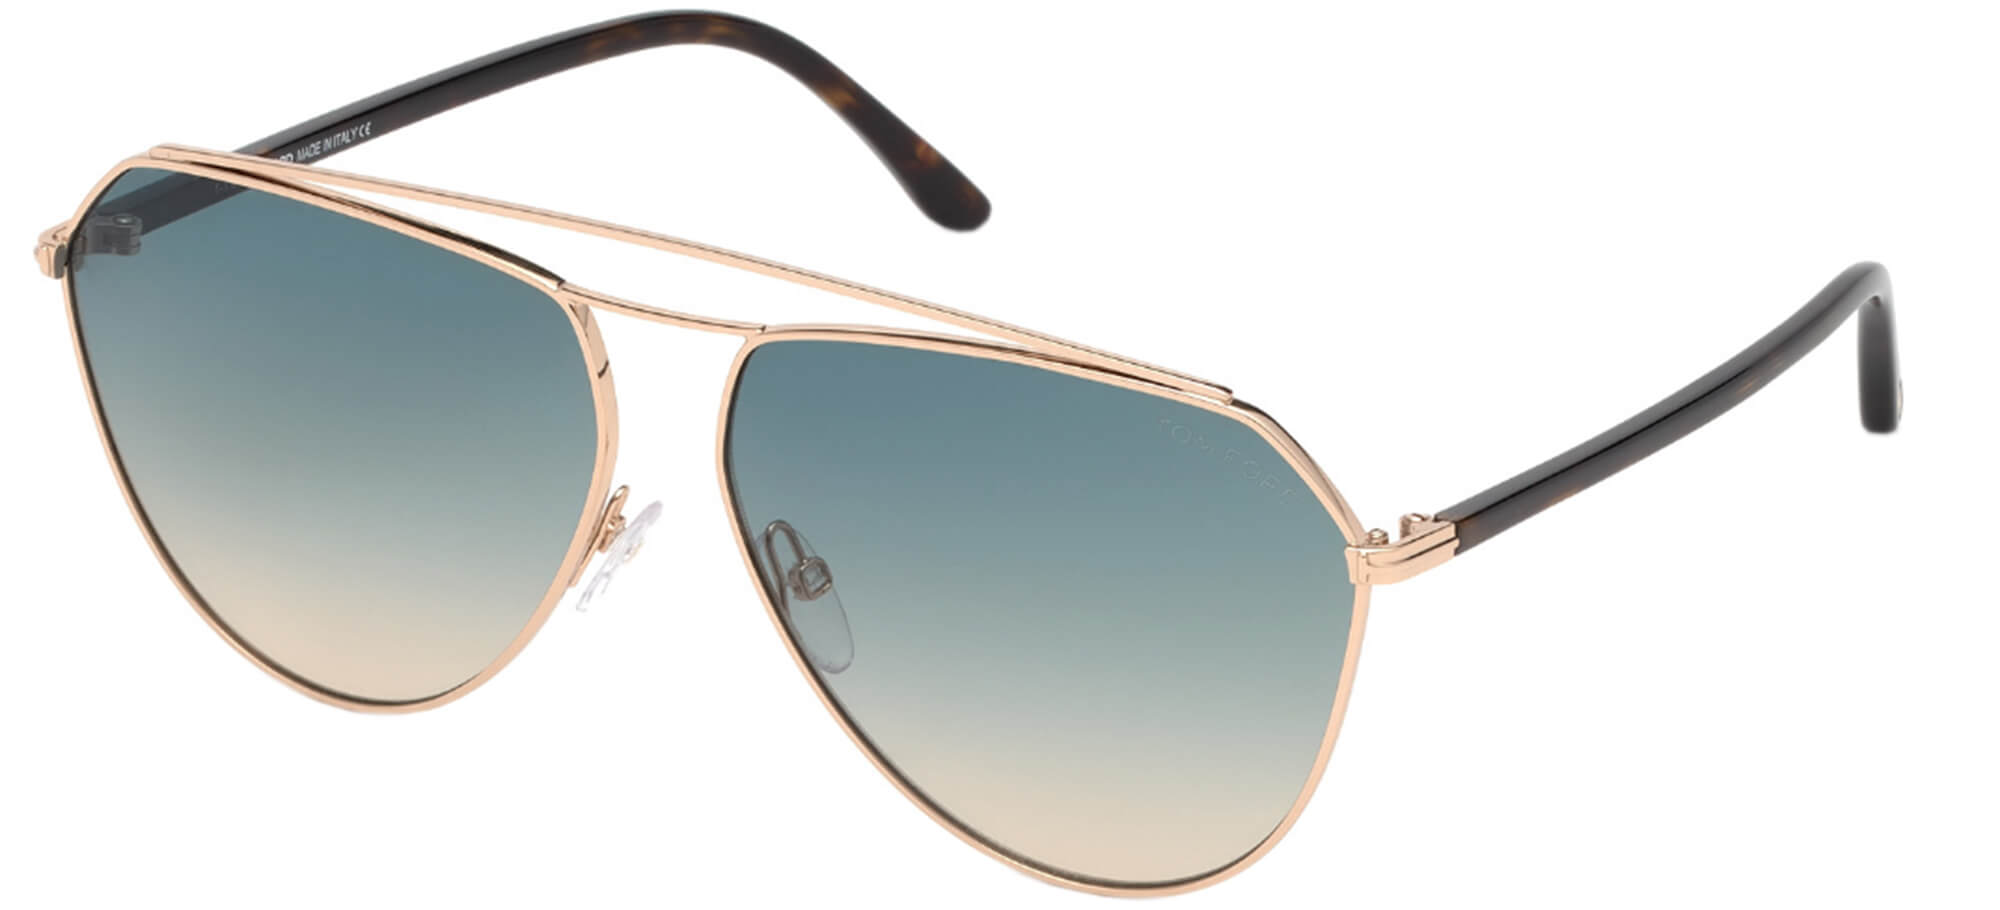 Tom FordBINX FT 0681Rose Gold/green Shaded (28P F)